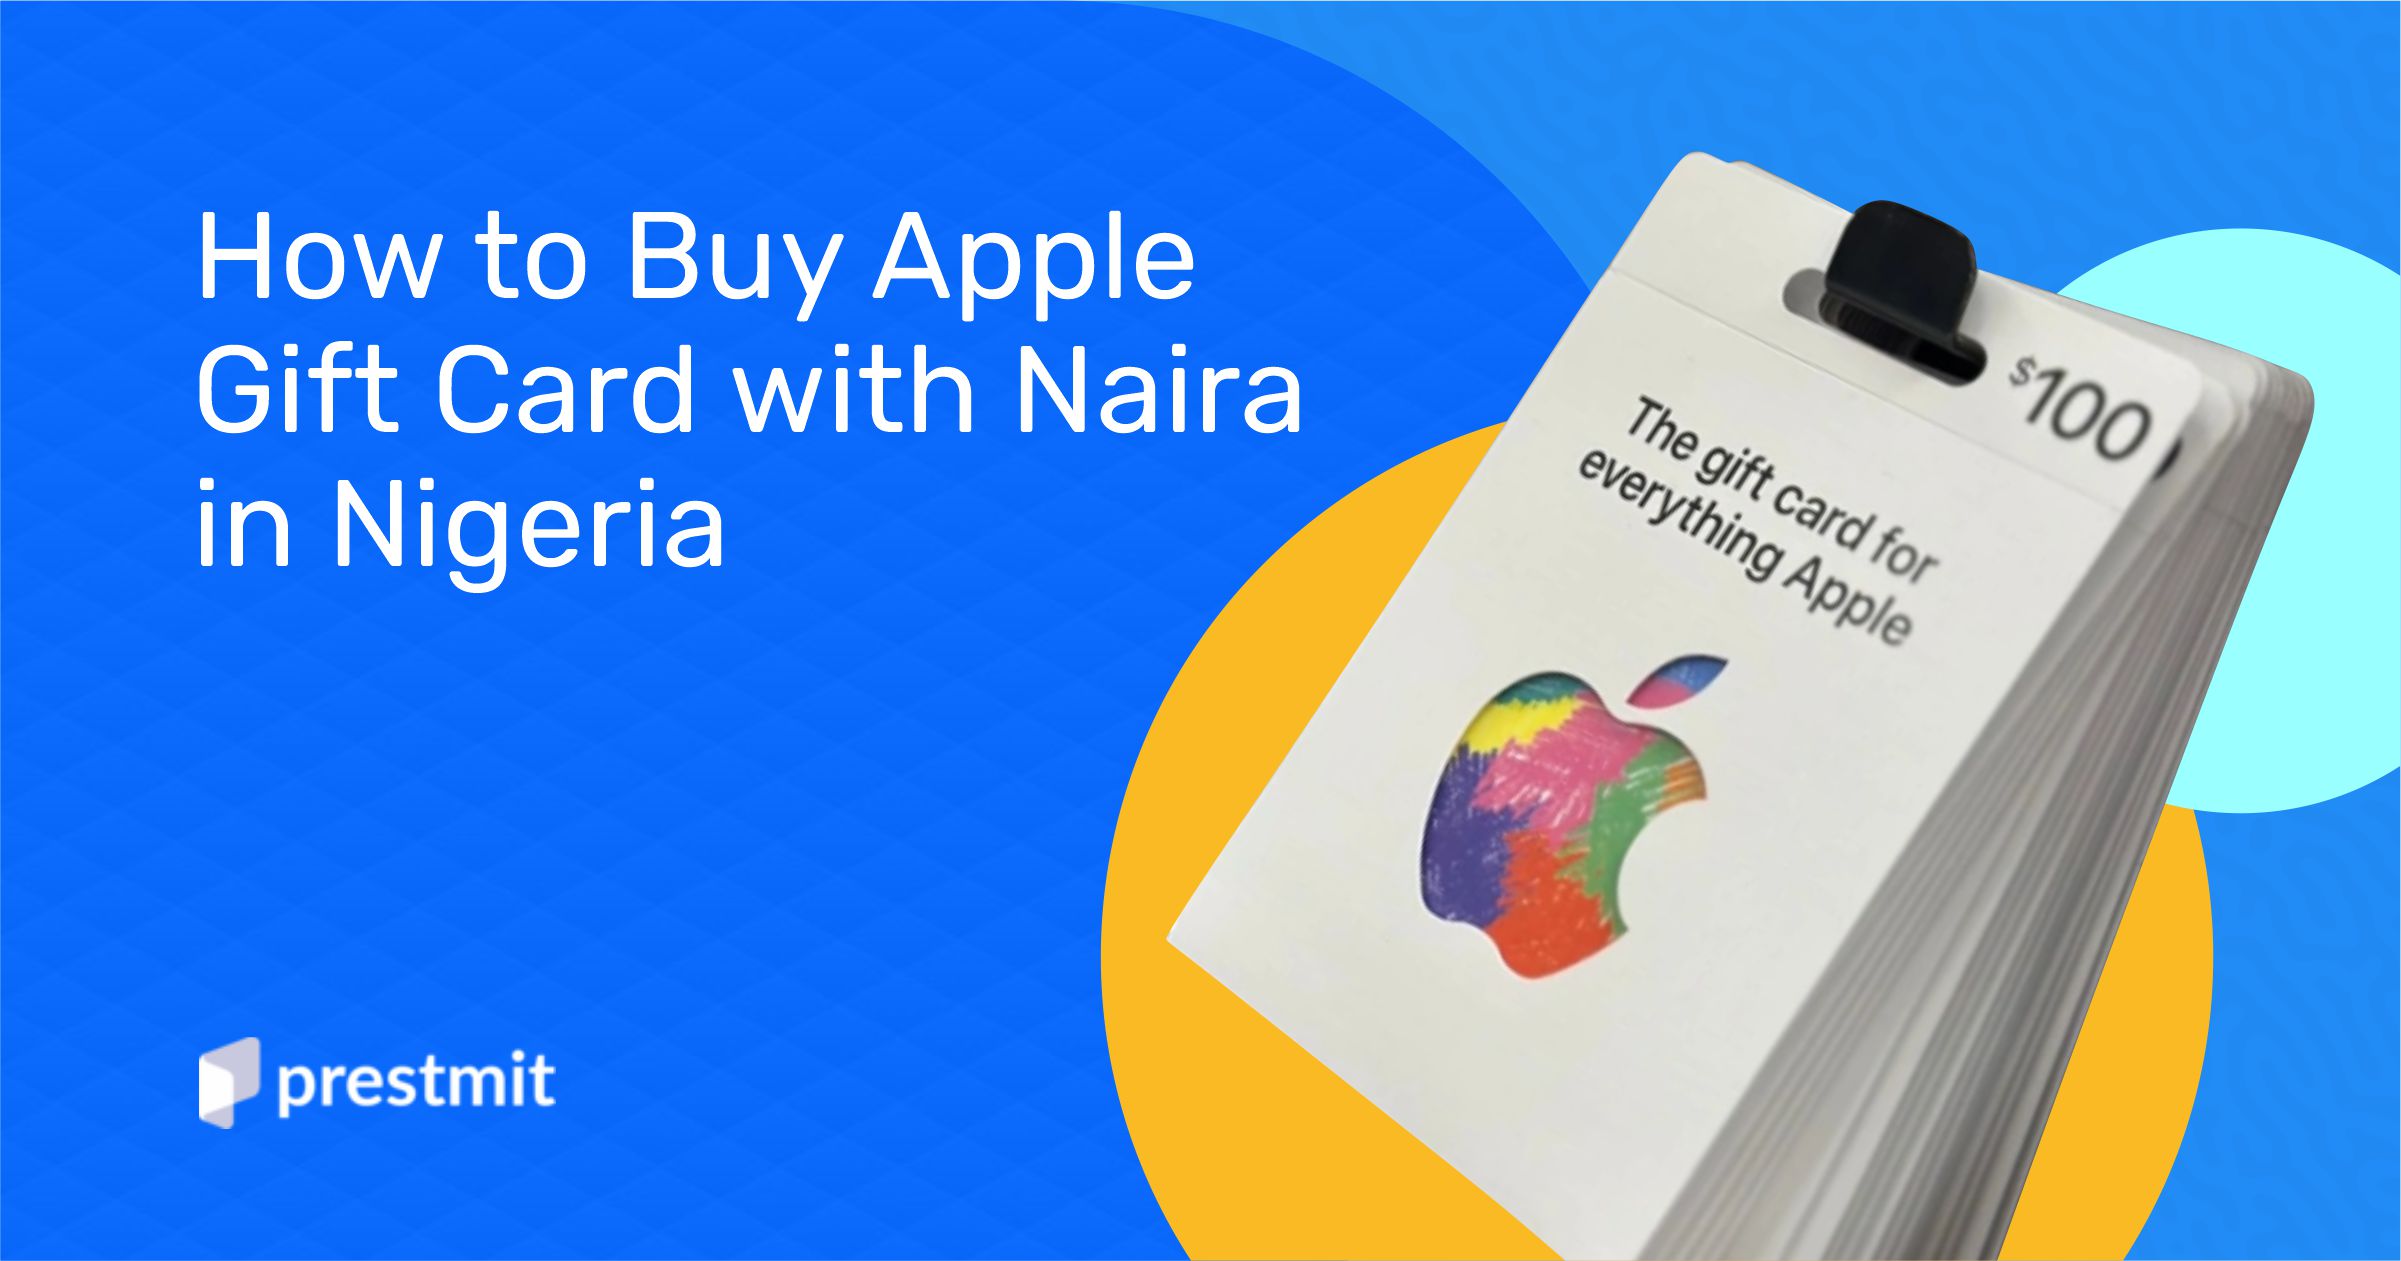 How to Buy Apple Gift Card With Naira: A Quick Guide